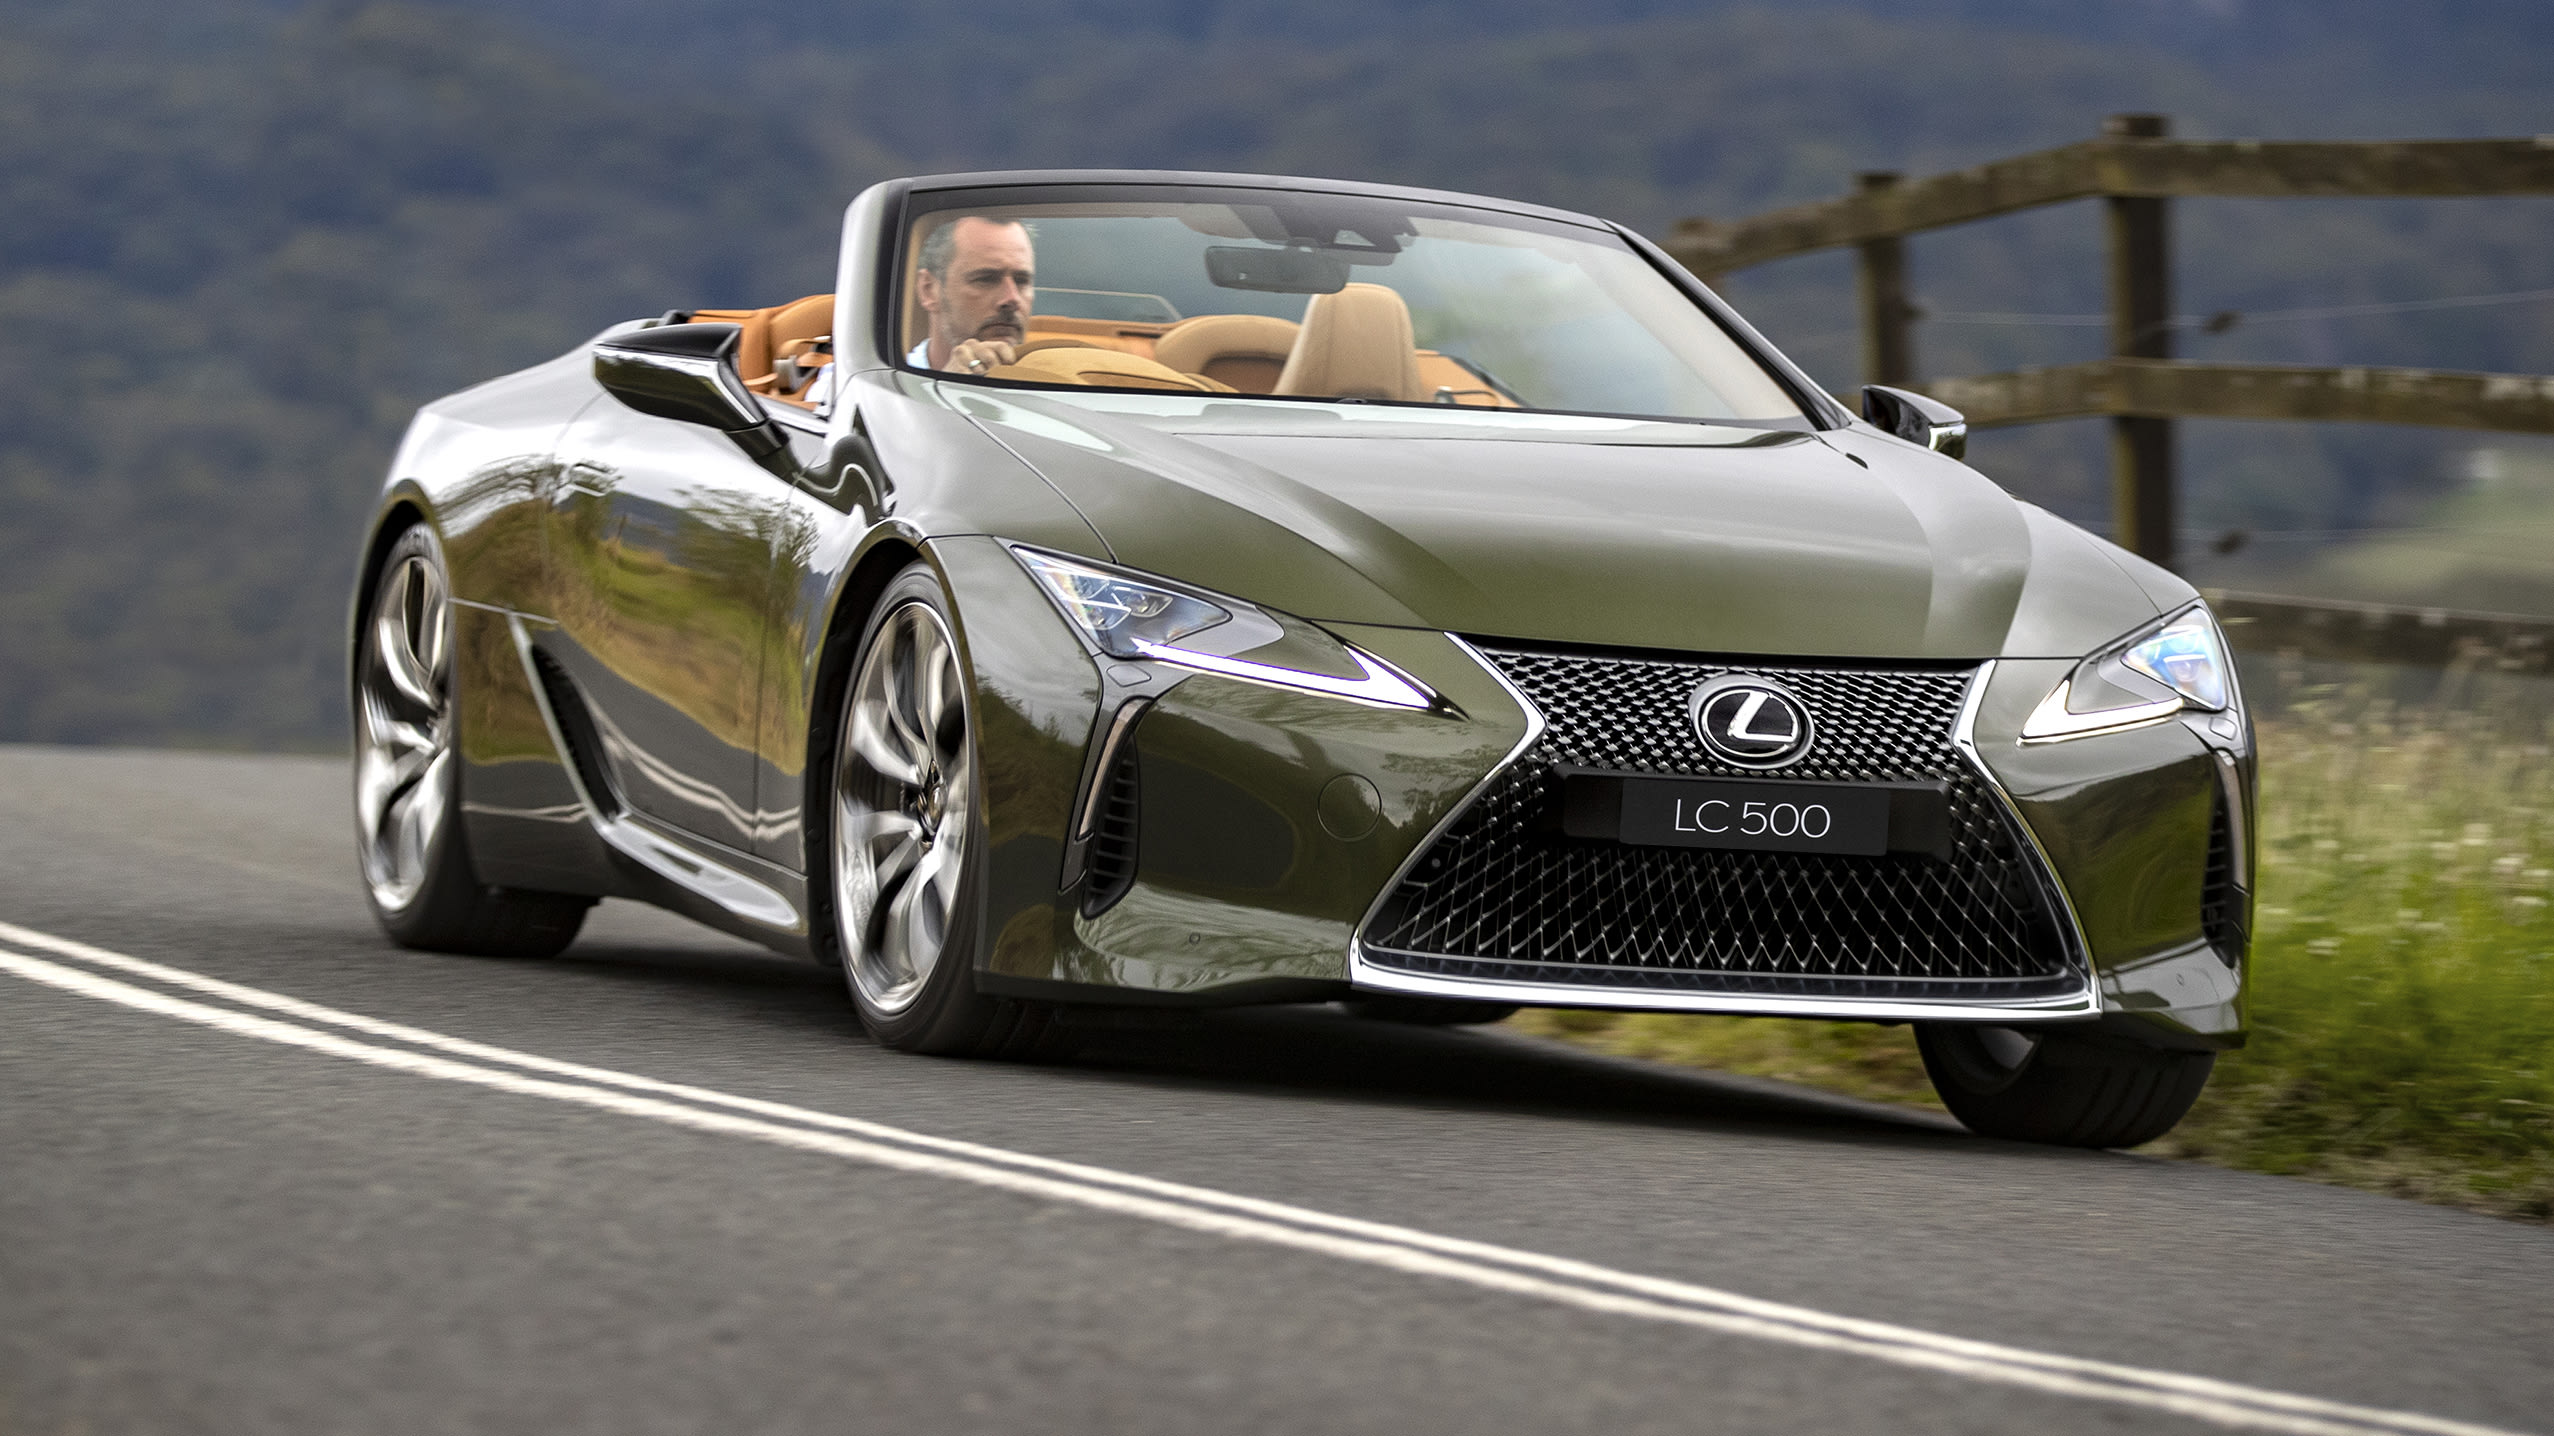 Lexus LC500 convertible beautifully crafted 2GB